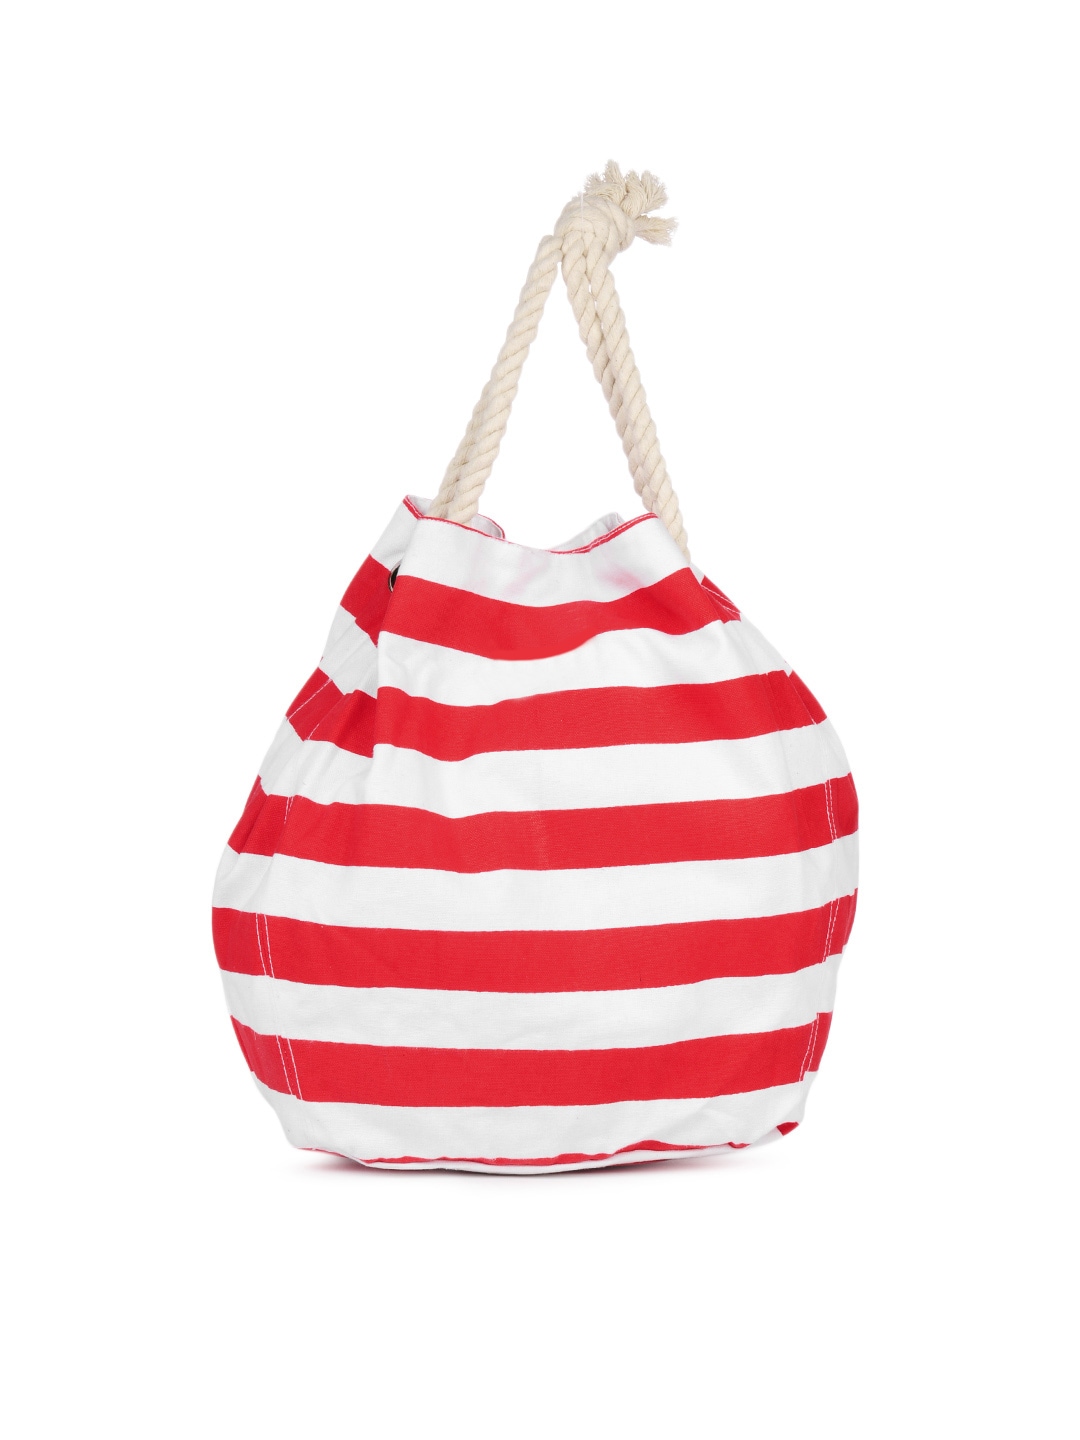 Be For Bag Women White And Red Striped Tote Bag